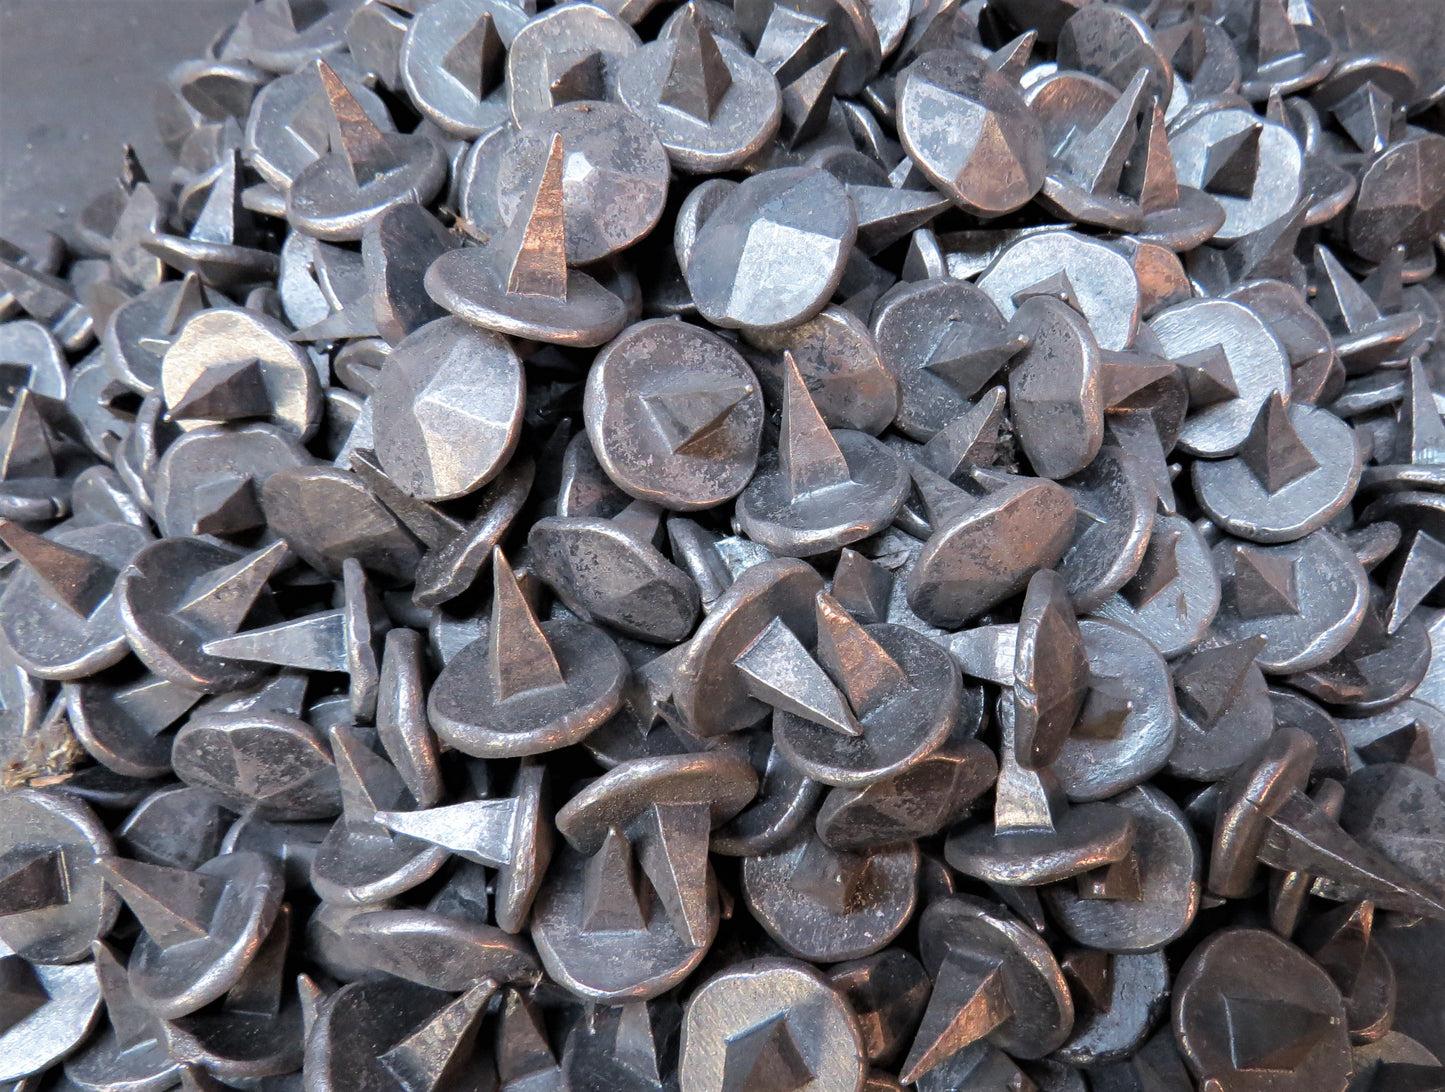 1 1/2" Rough Lot of 100 Clavos / Decorative Nail Heads